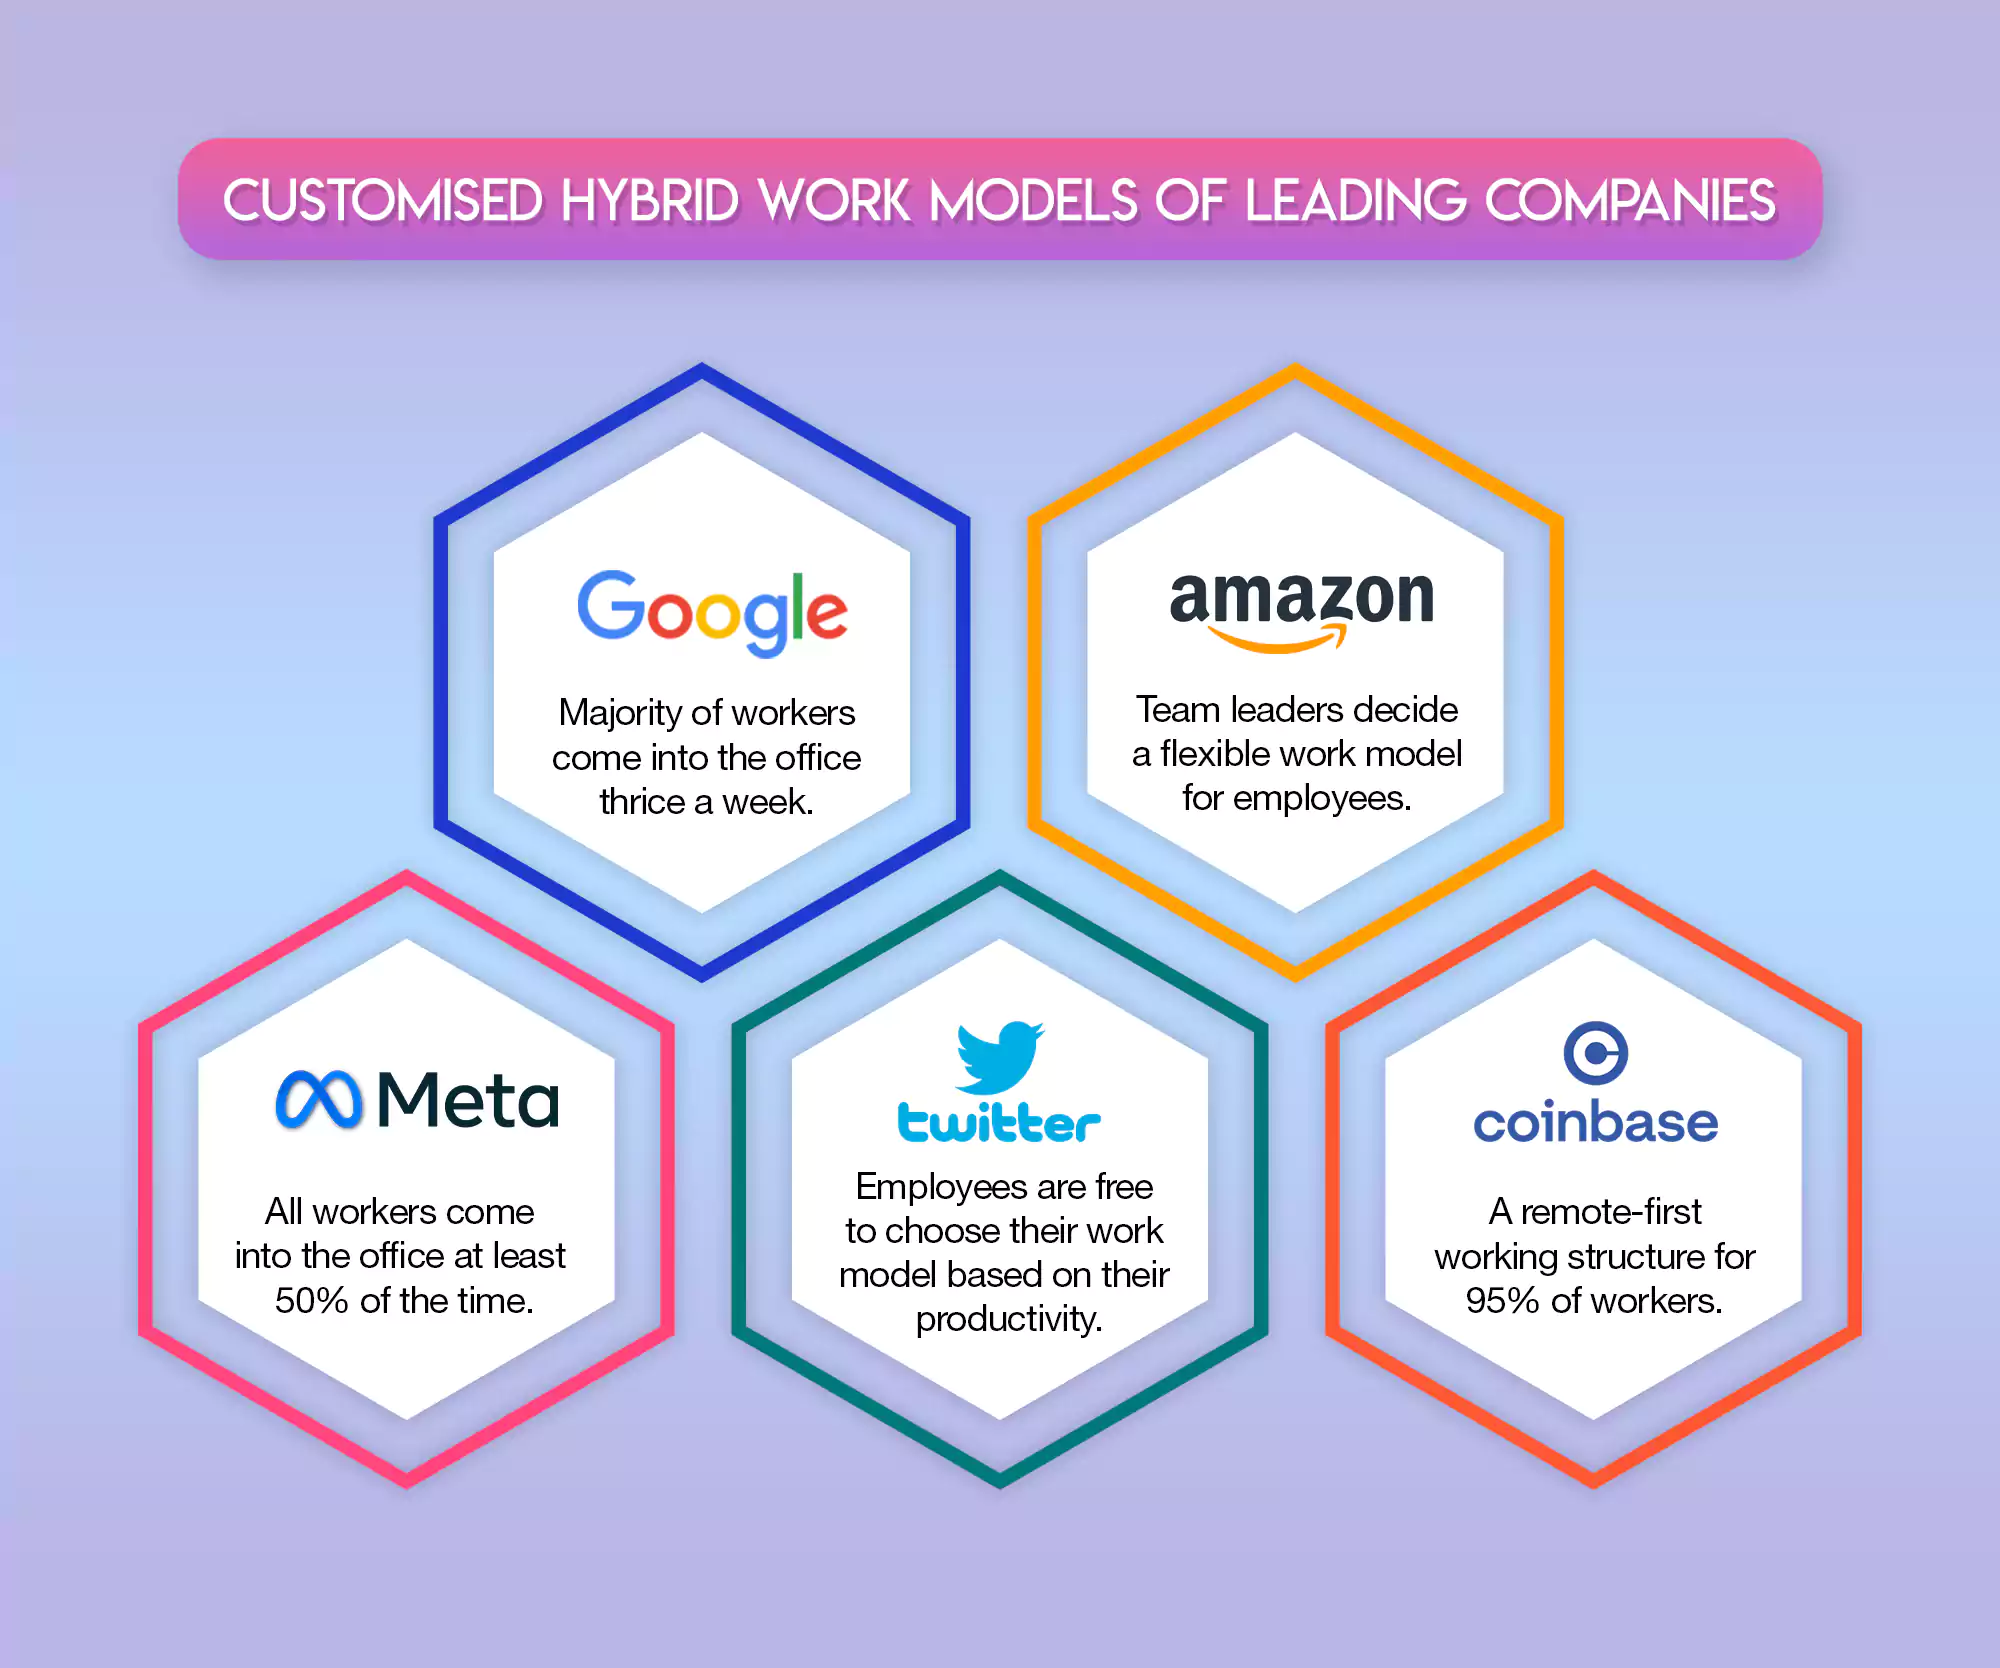 Top companies that have adopted the hybrid work model